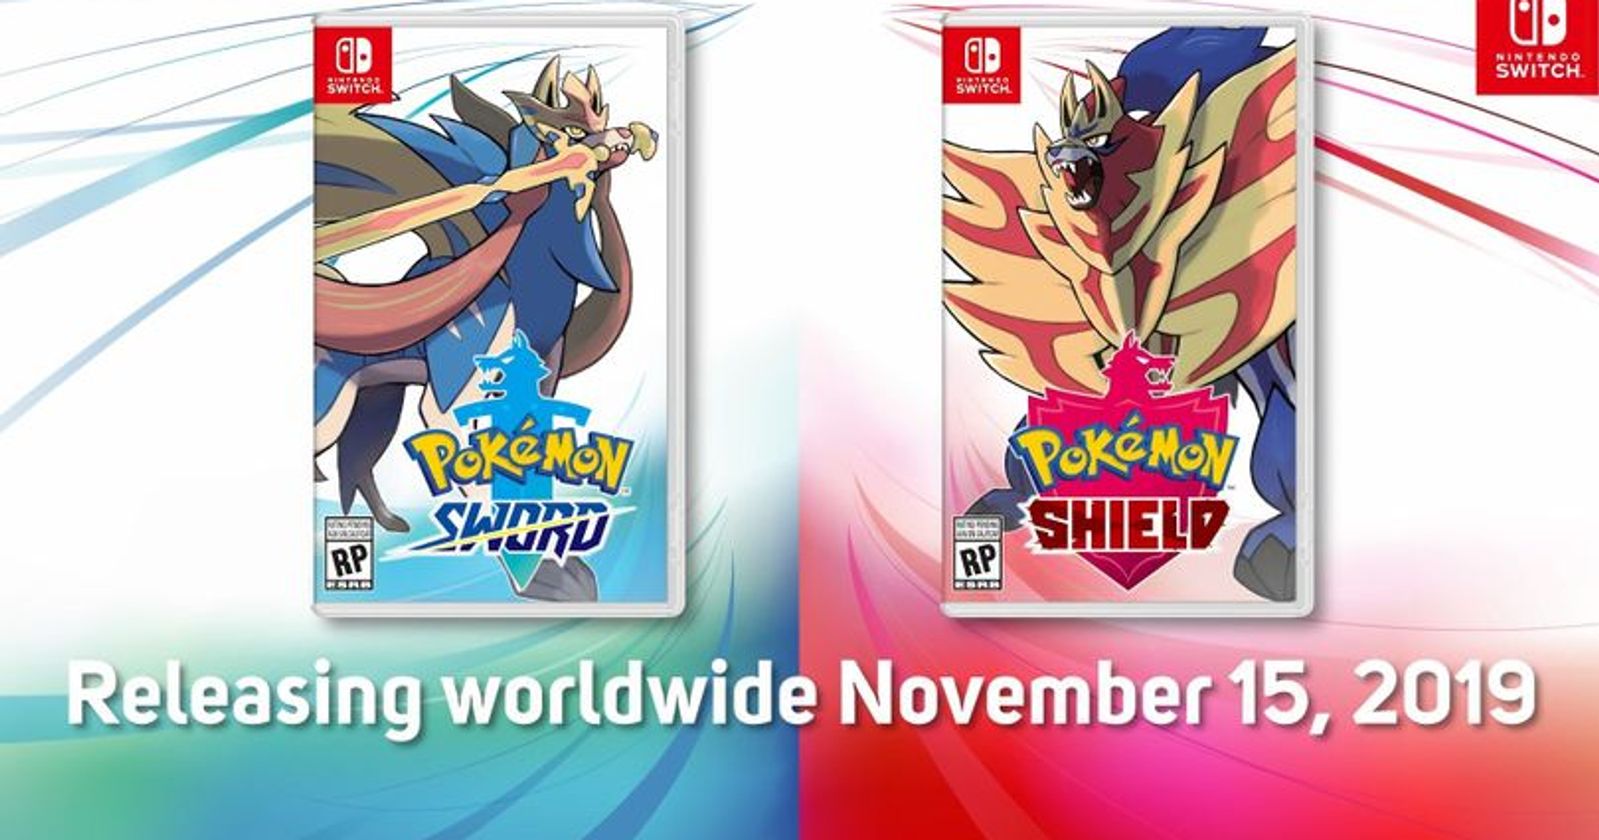 New Trailer for Pokemon Sword and Shield Debuts Gigantamaxing and